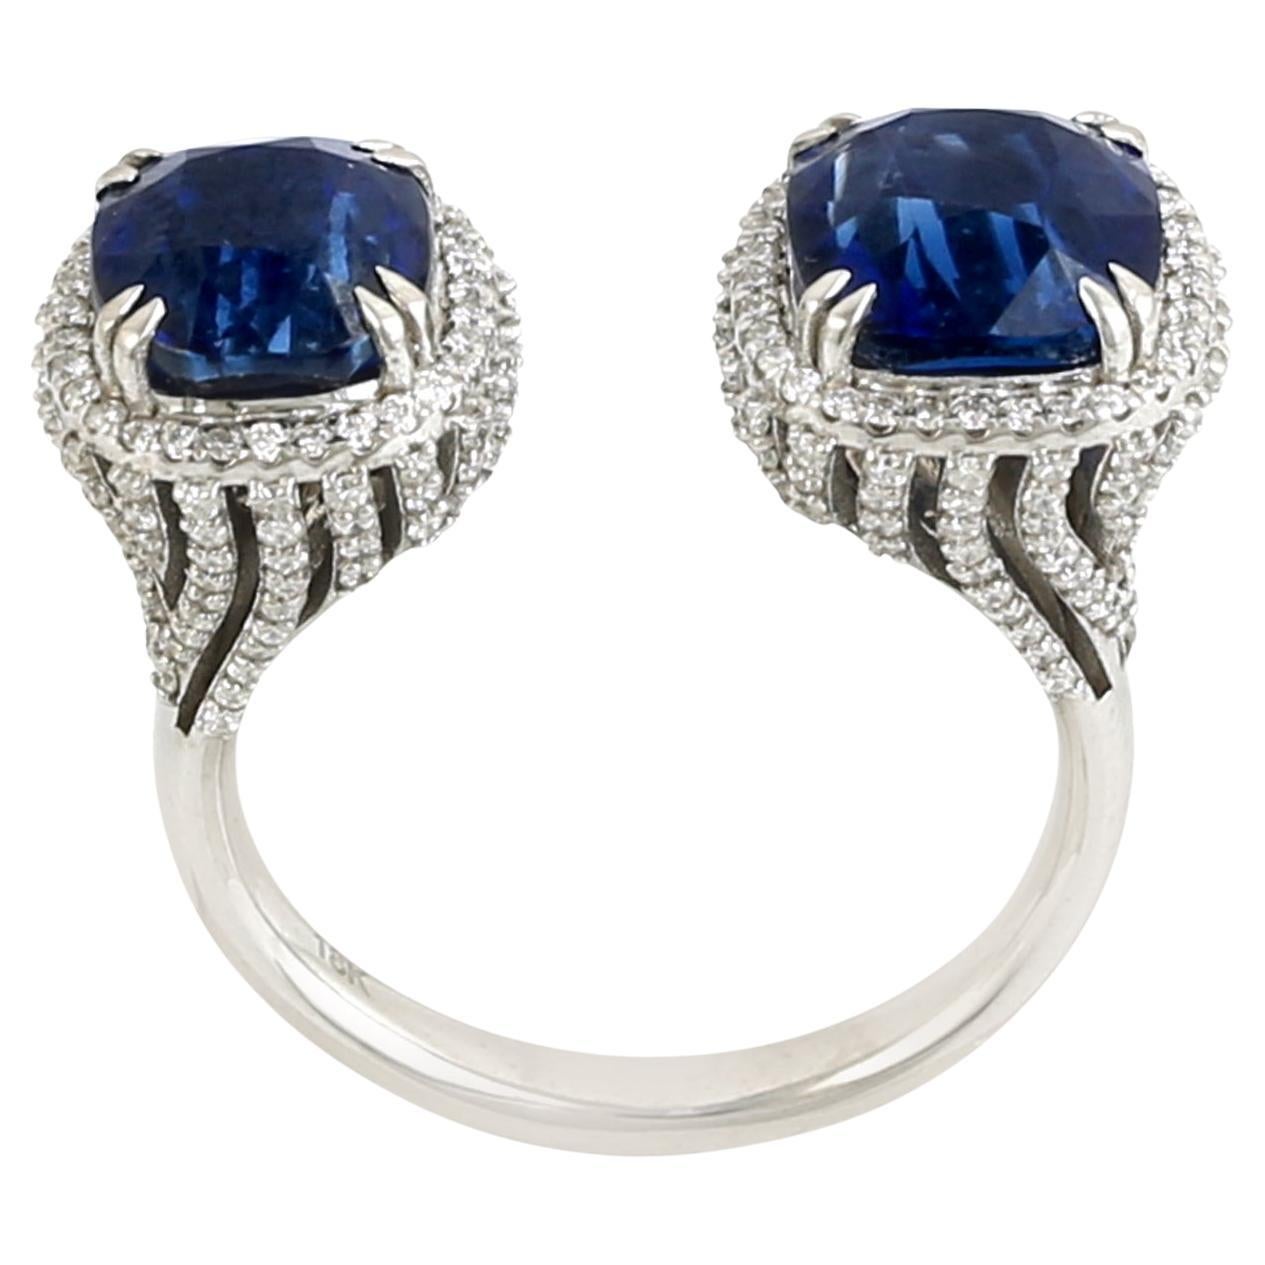 Blue Sapphire Twin Ring With Diamonds Made In 18k White Gold